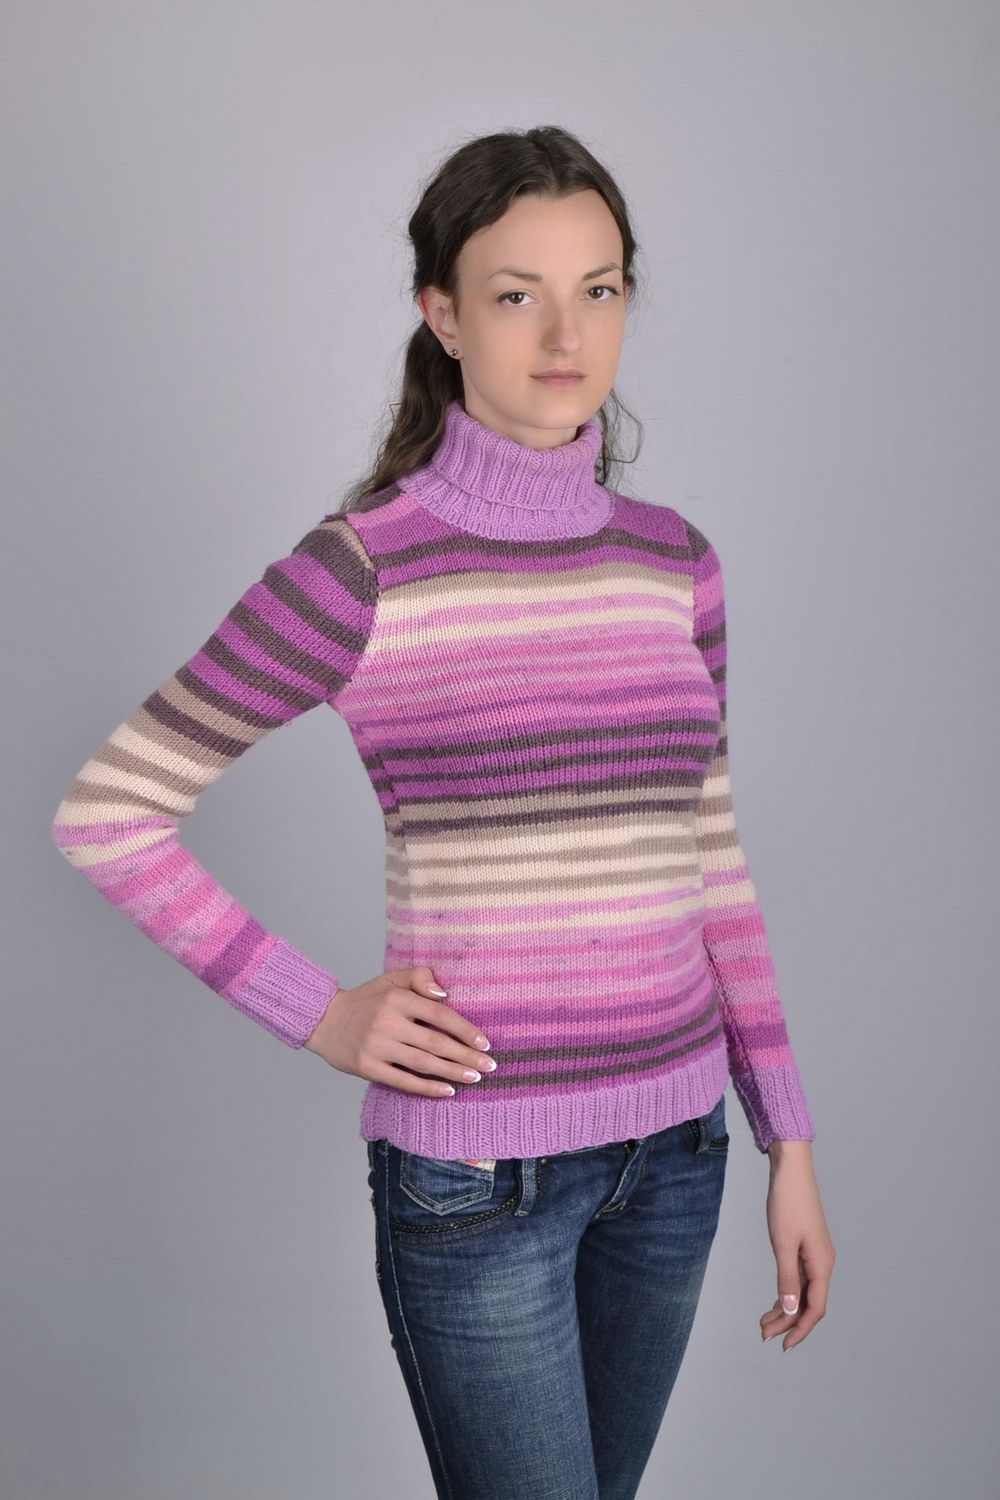 Knitted wool sweater of lilac color photo 1